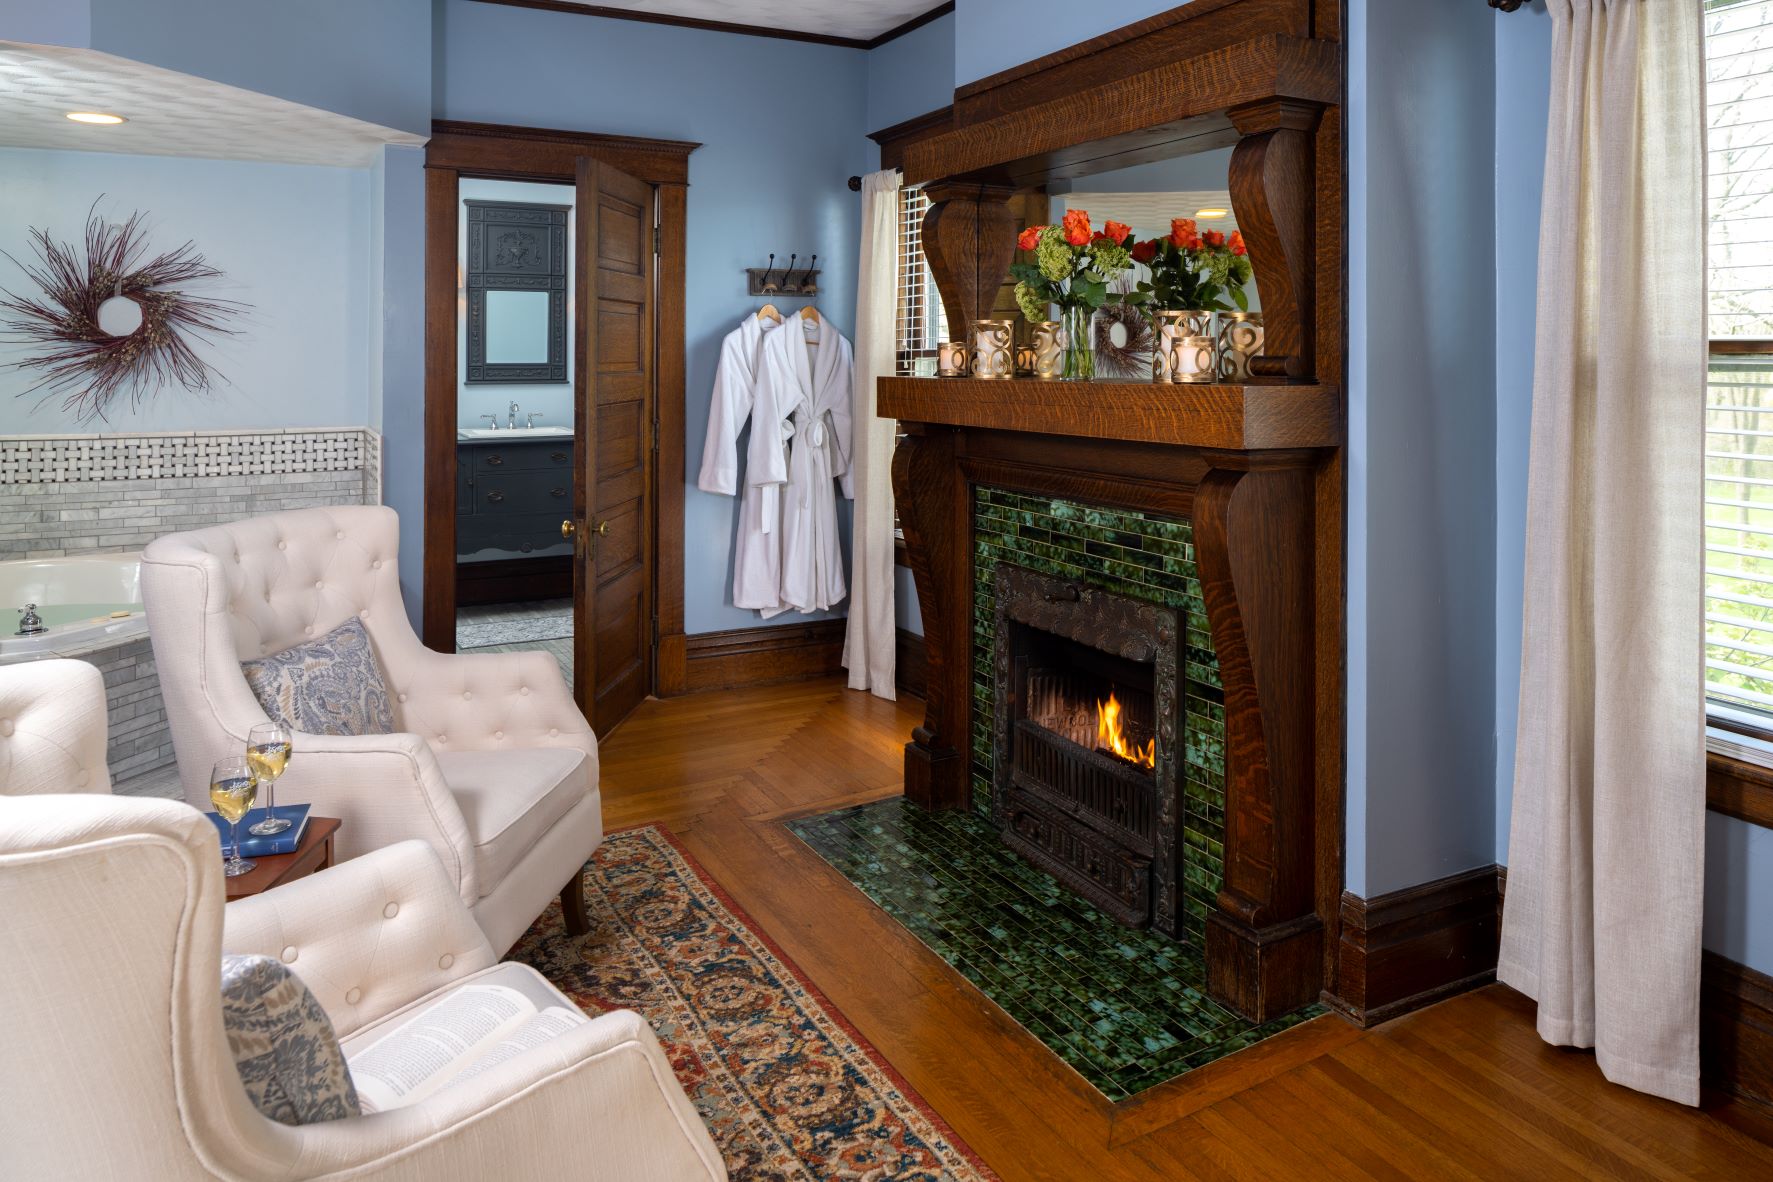 Cozy guest room with light blue walls, two upholstered chairs in front of a gas fireplace